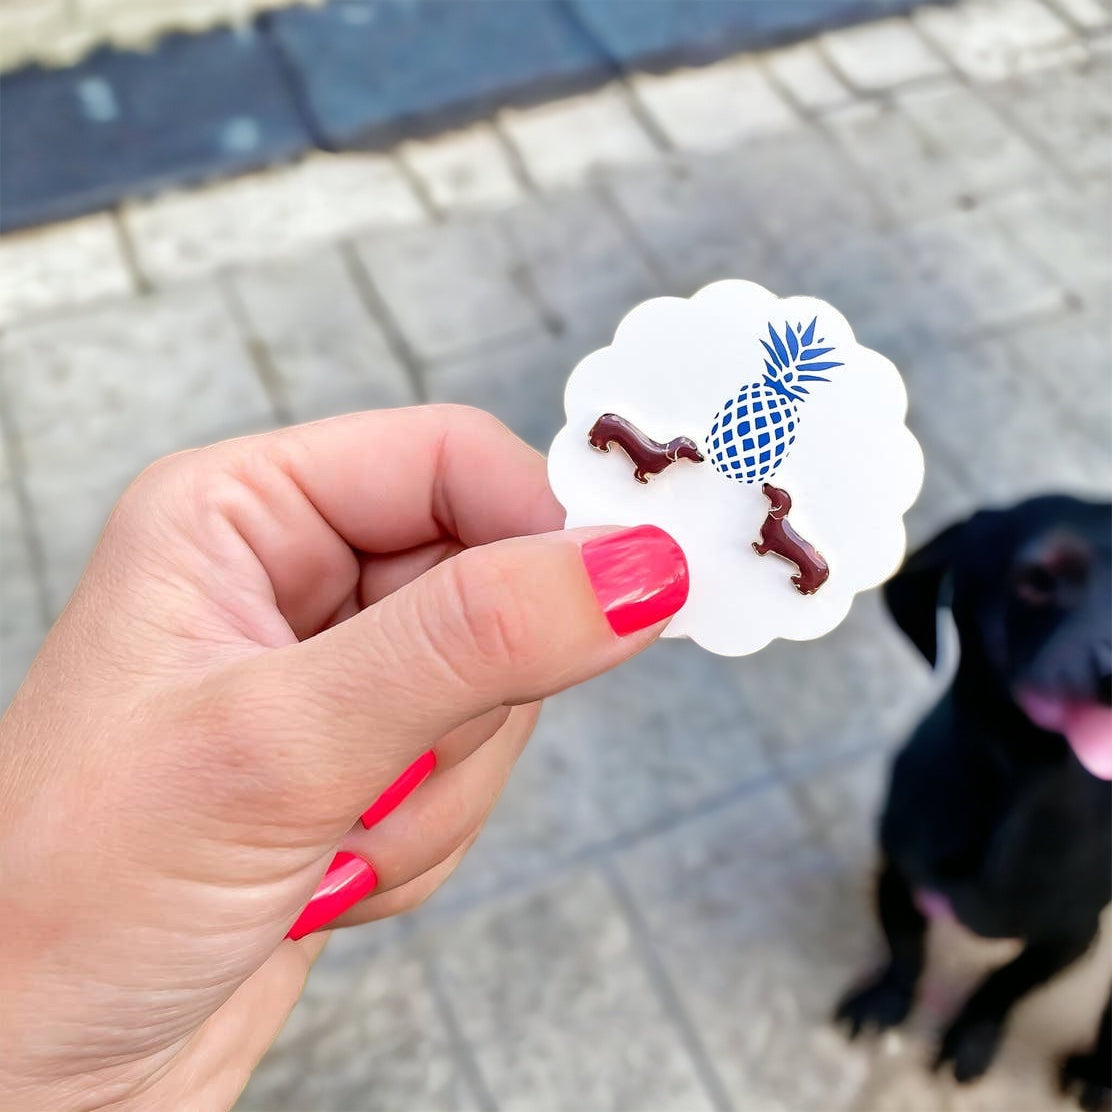 Signature Pet Enamel Studs by Prep Obsessed - Dachshund